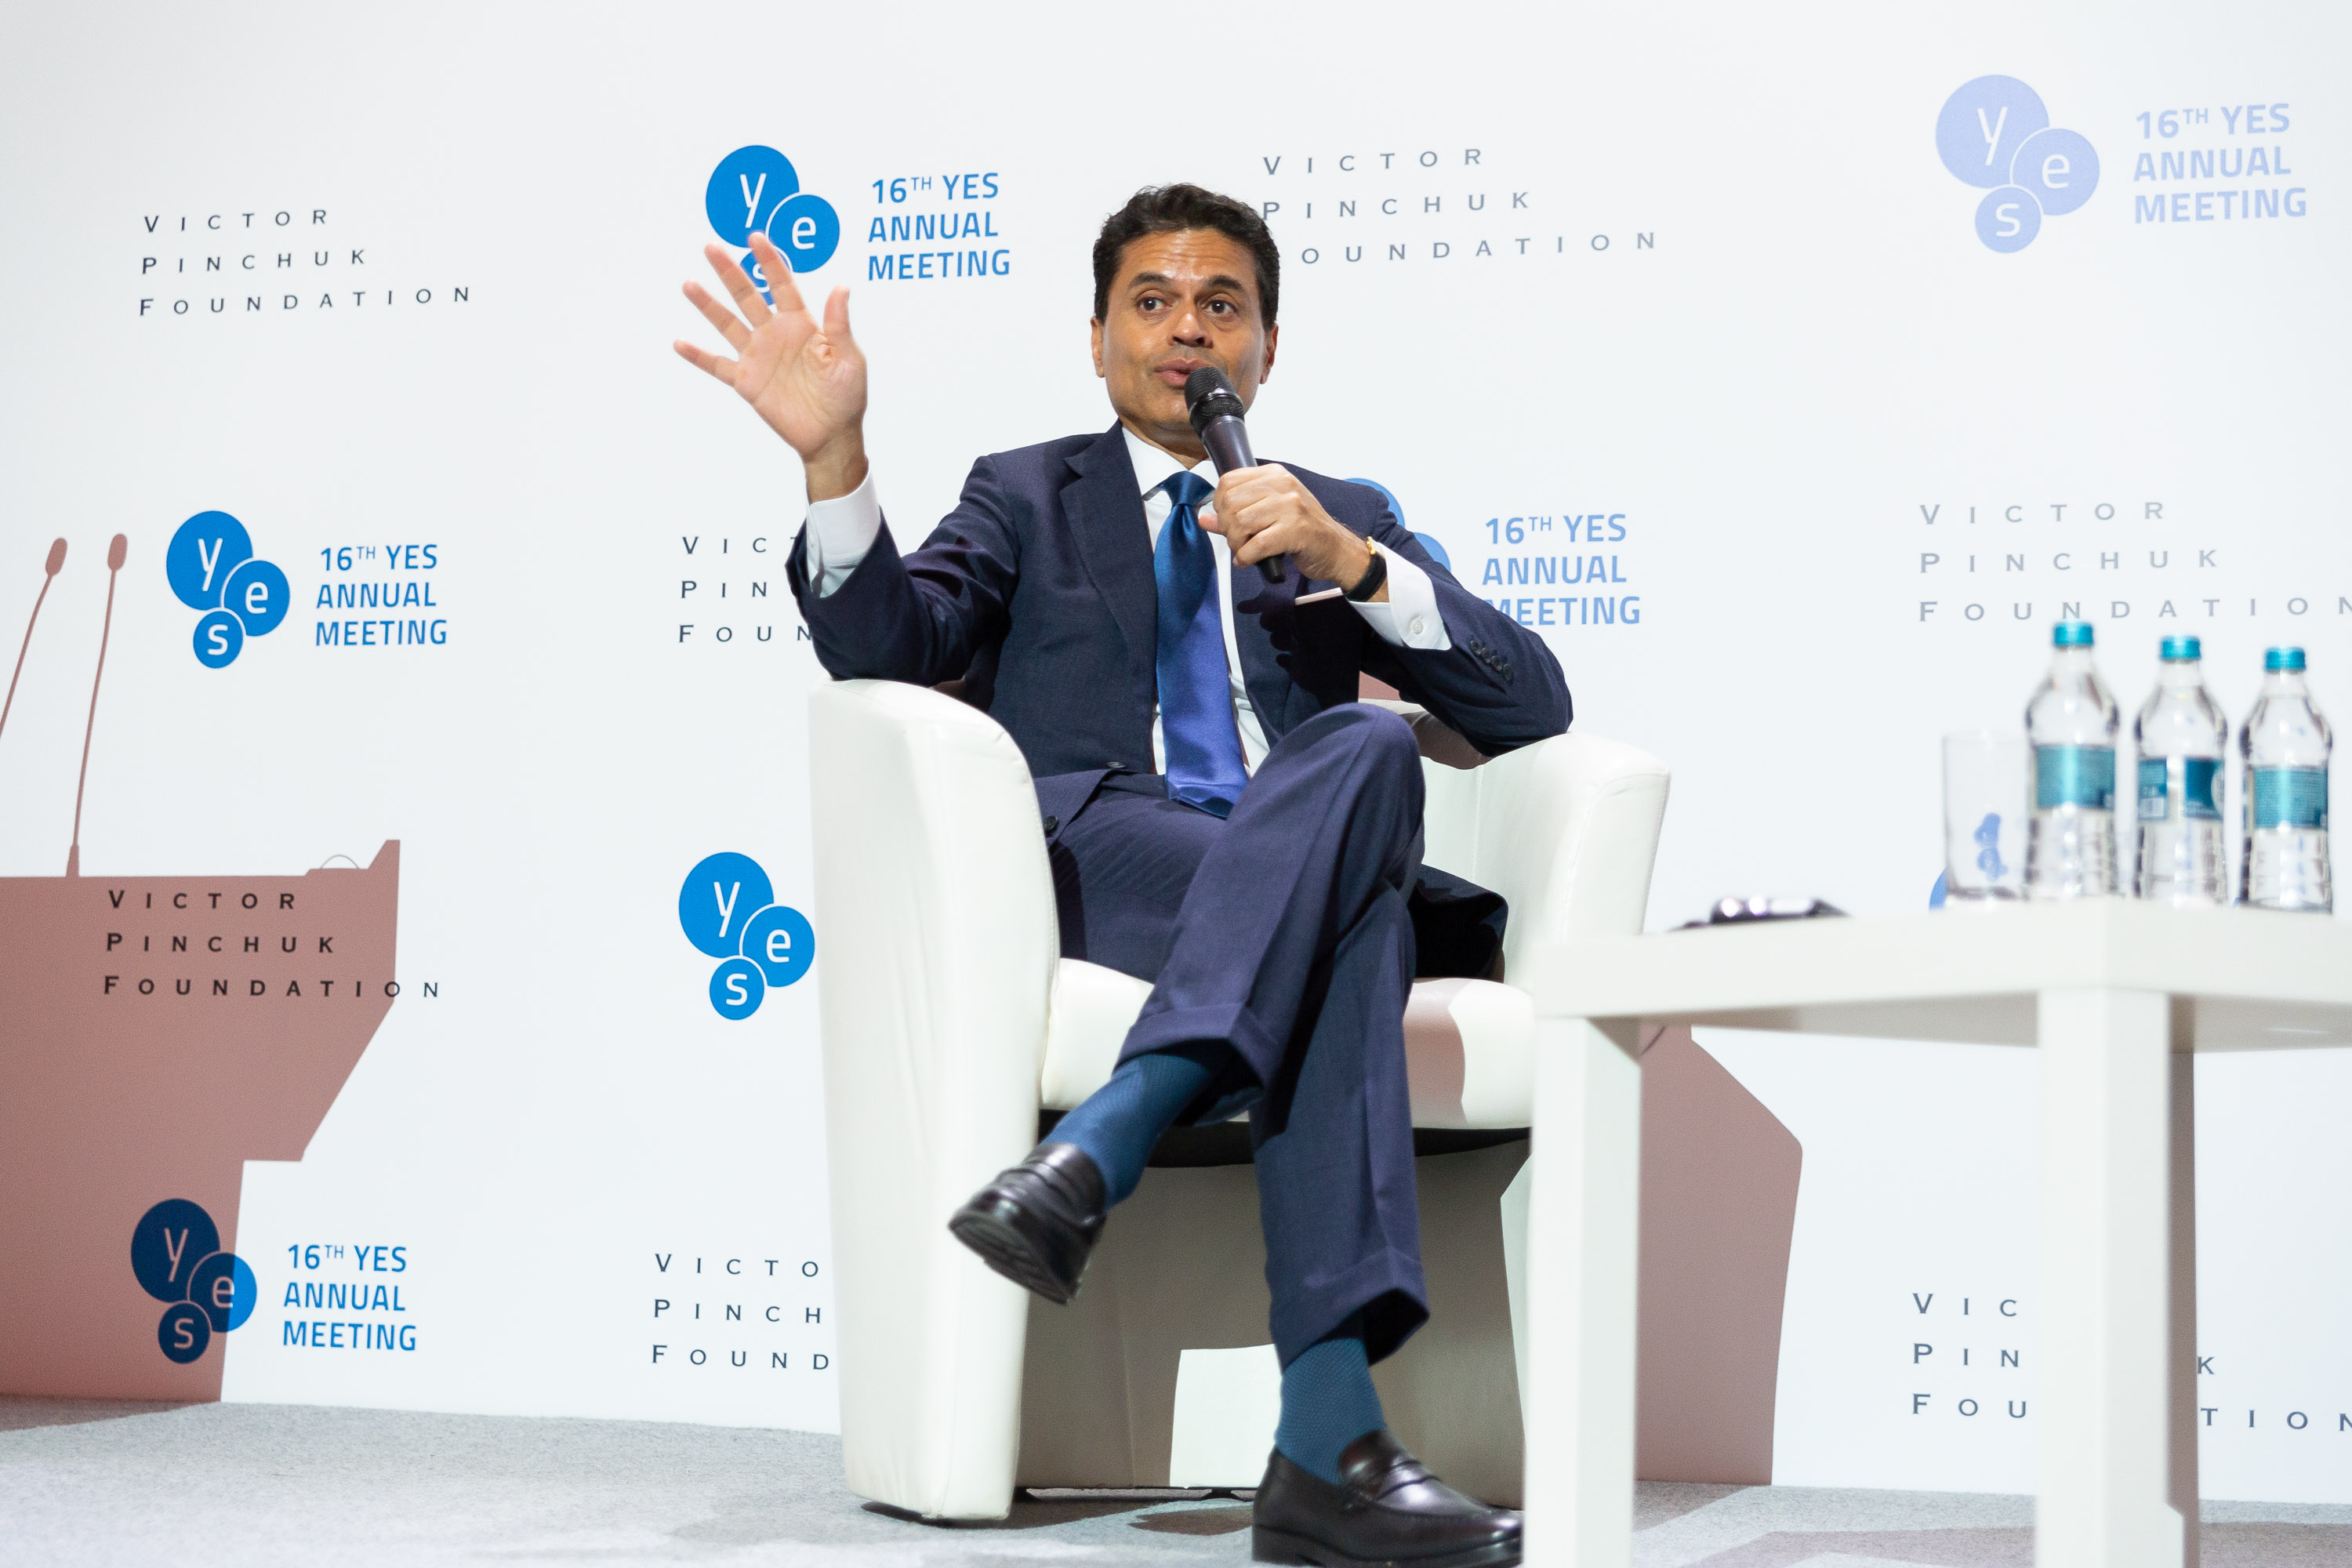 Public lecture “Western Decline, China’s Rise and a New World Order” by Fareed Zakaria, Host, Fareed Zakaria GPS, CNN